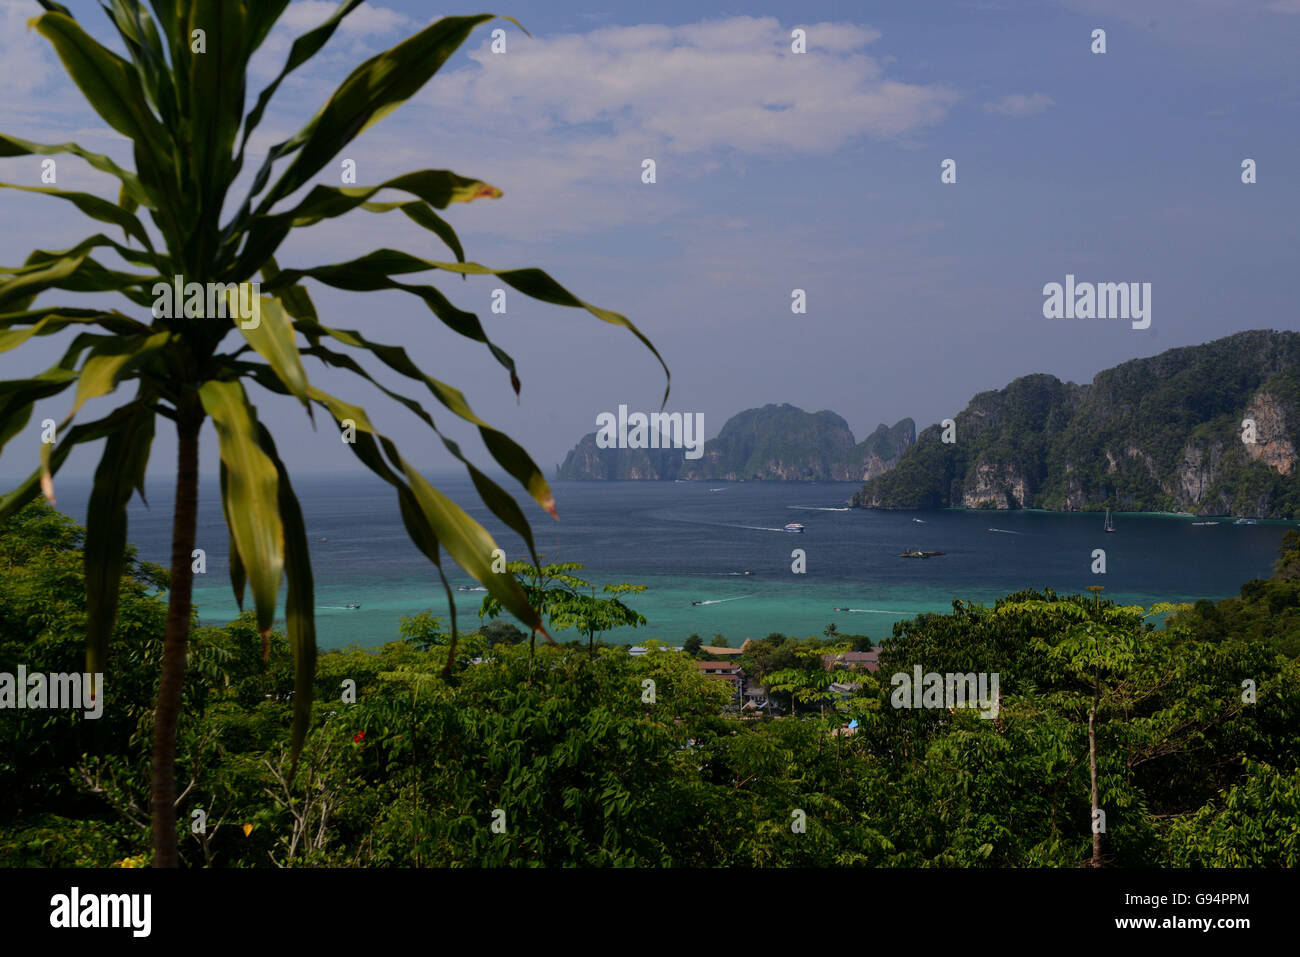 The view from the Viewpoint on the Town of Ko PhiPhi on Ko Phi Phi Island outside of the City of Krabi on the Andaman Sea in the Stock Photo